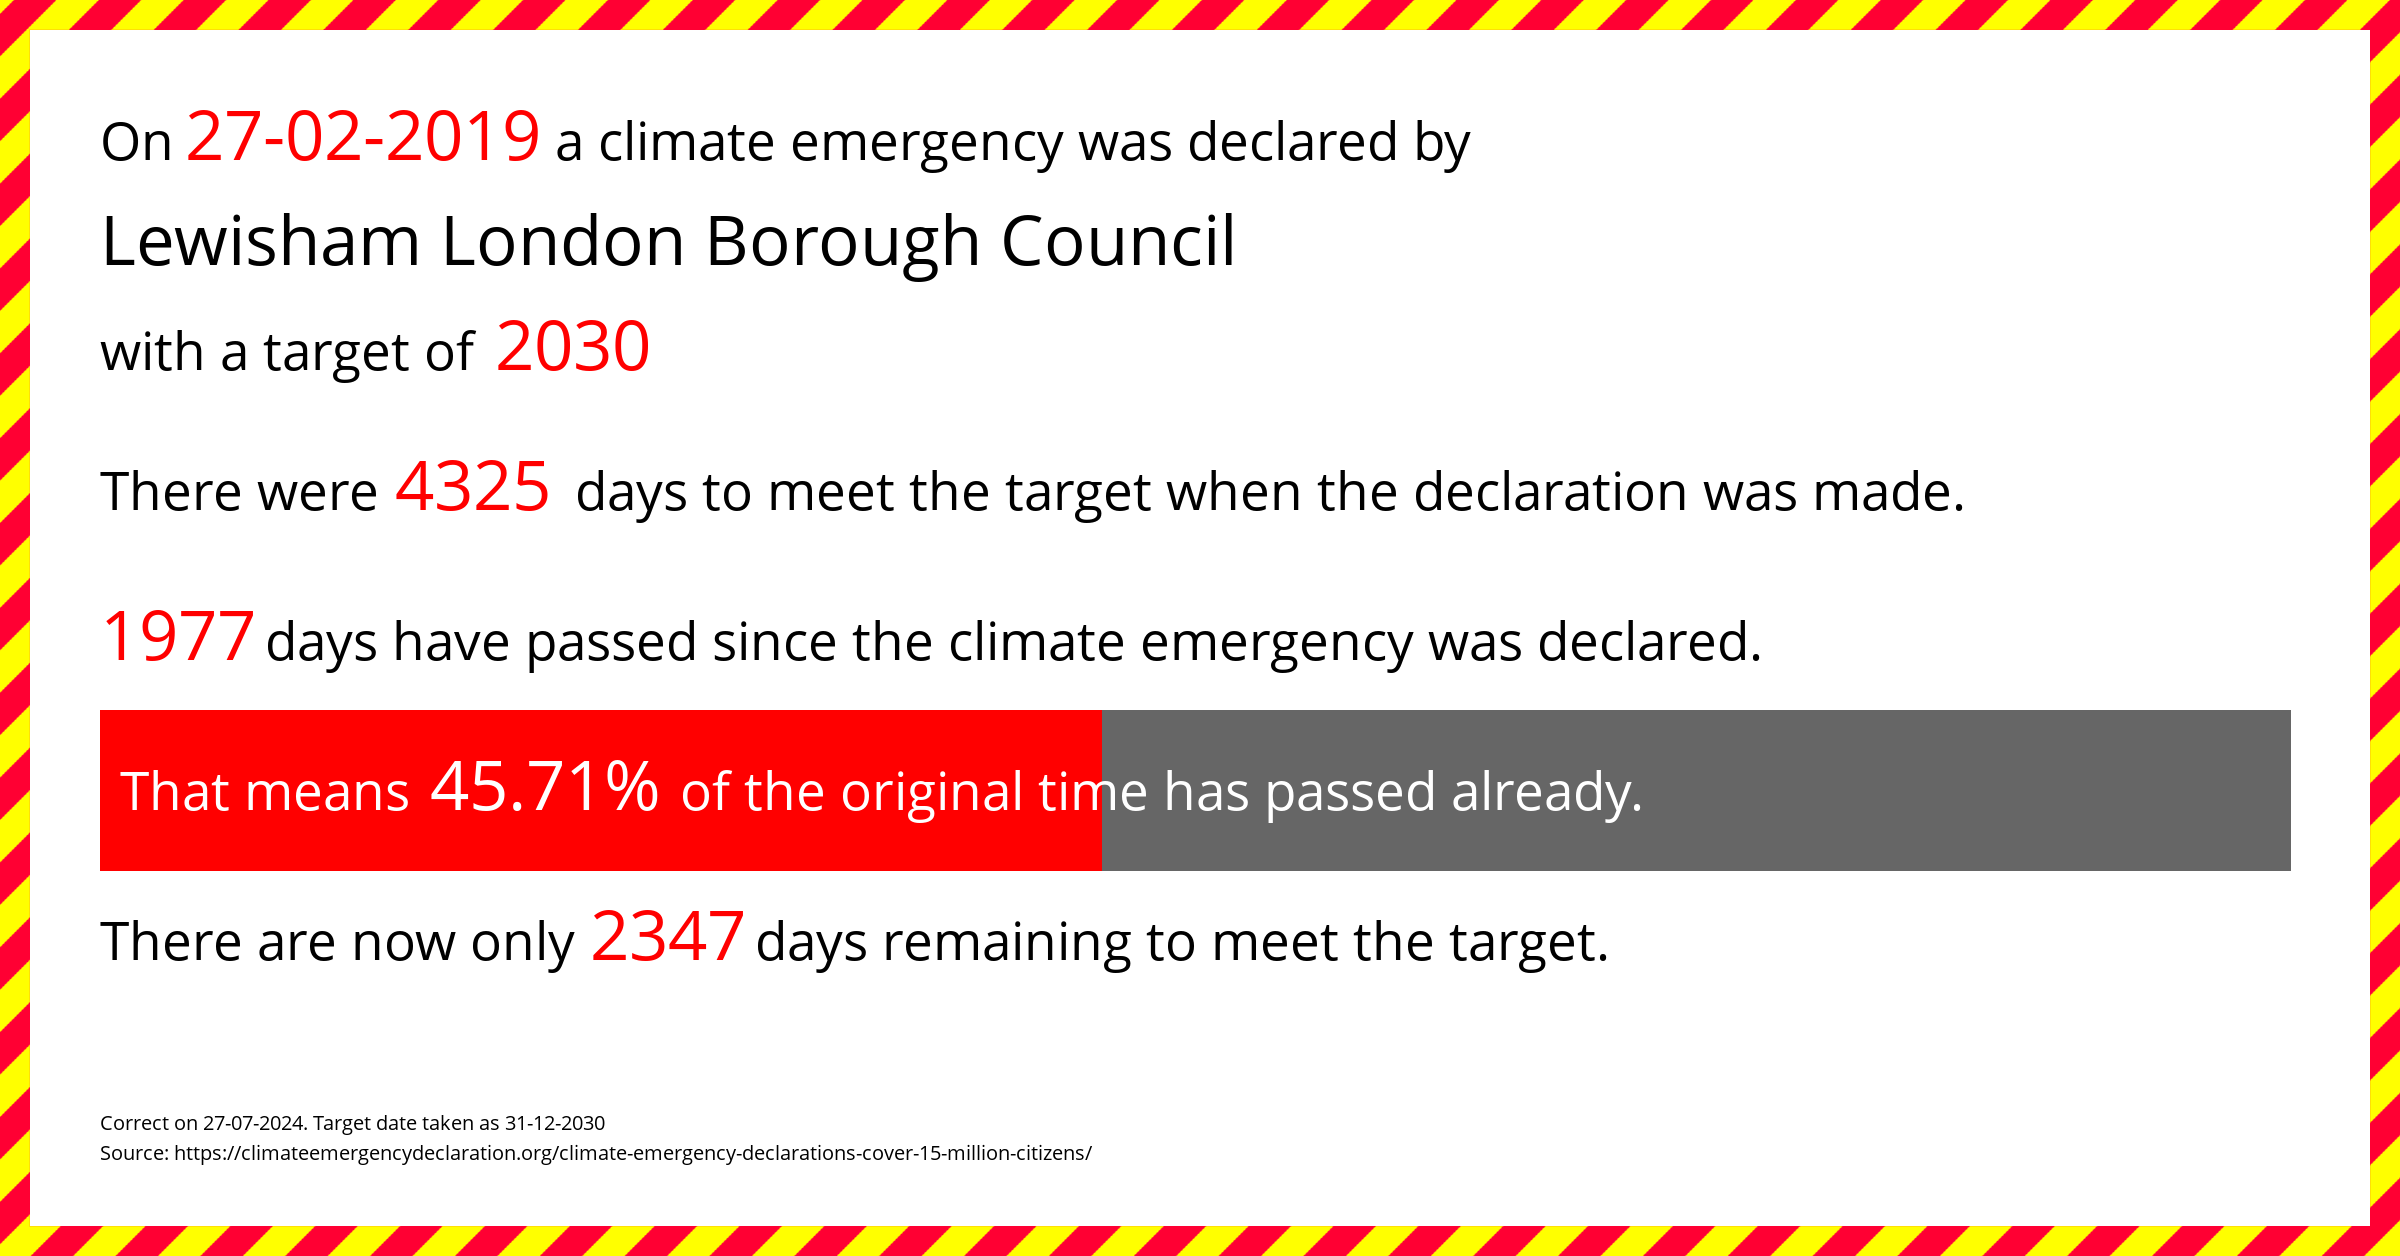 Lewisham London Borough Council declared a Climate emergency on Wednesday 27th February 2019, with a target of 2030.